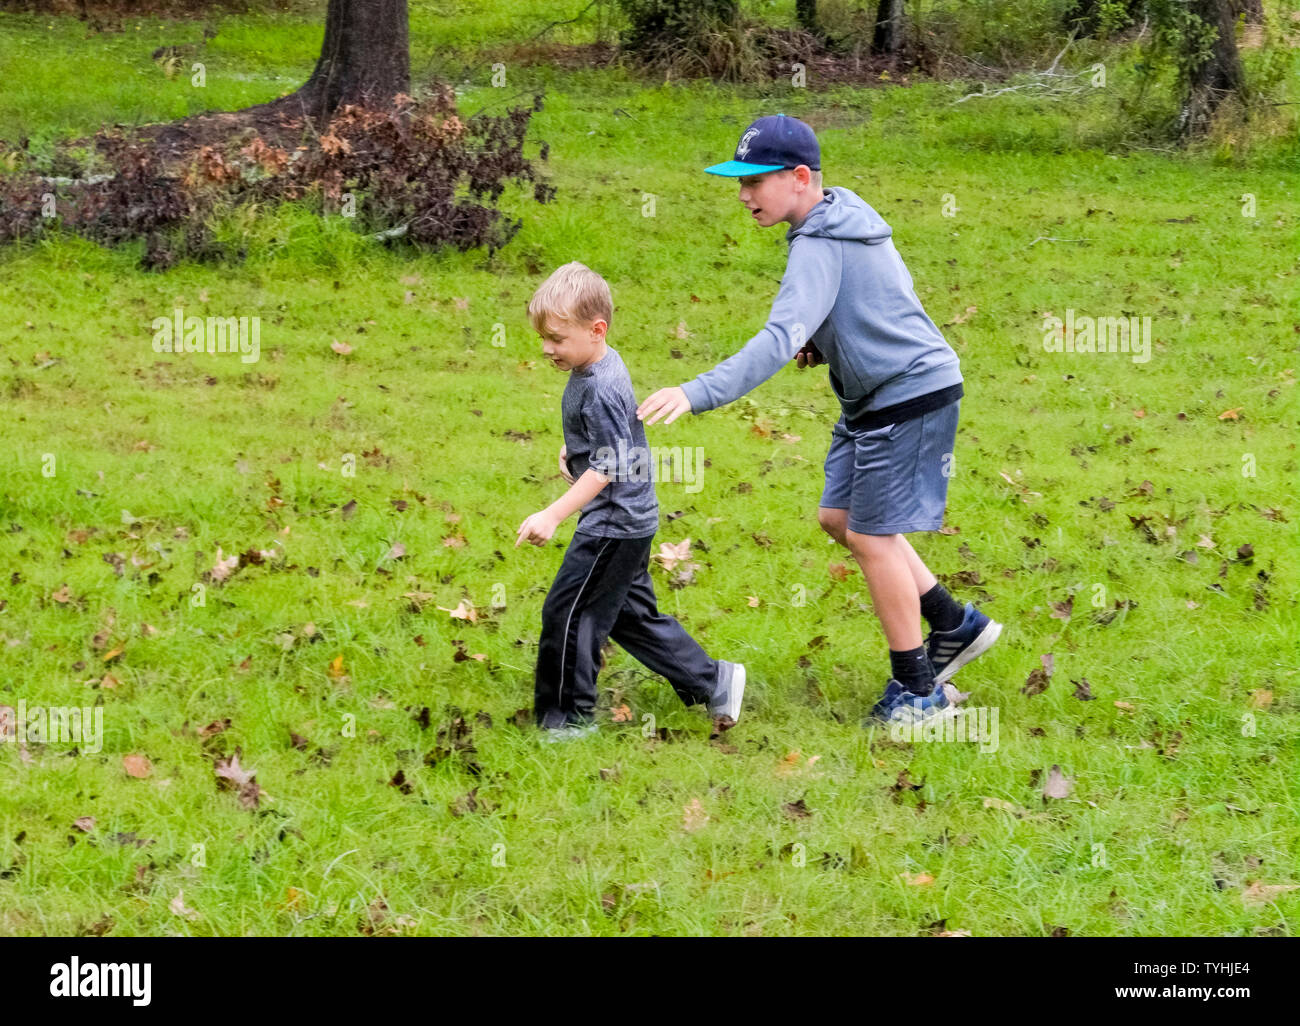 Two young American brothers have fun playing in the grassy backyard of their rural home on an overcast autumn day in Louisiana, USA. Stock Photo